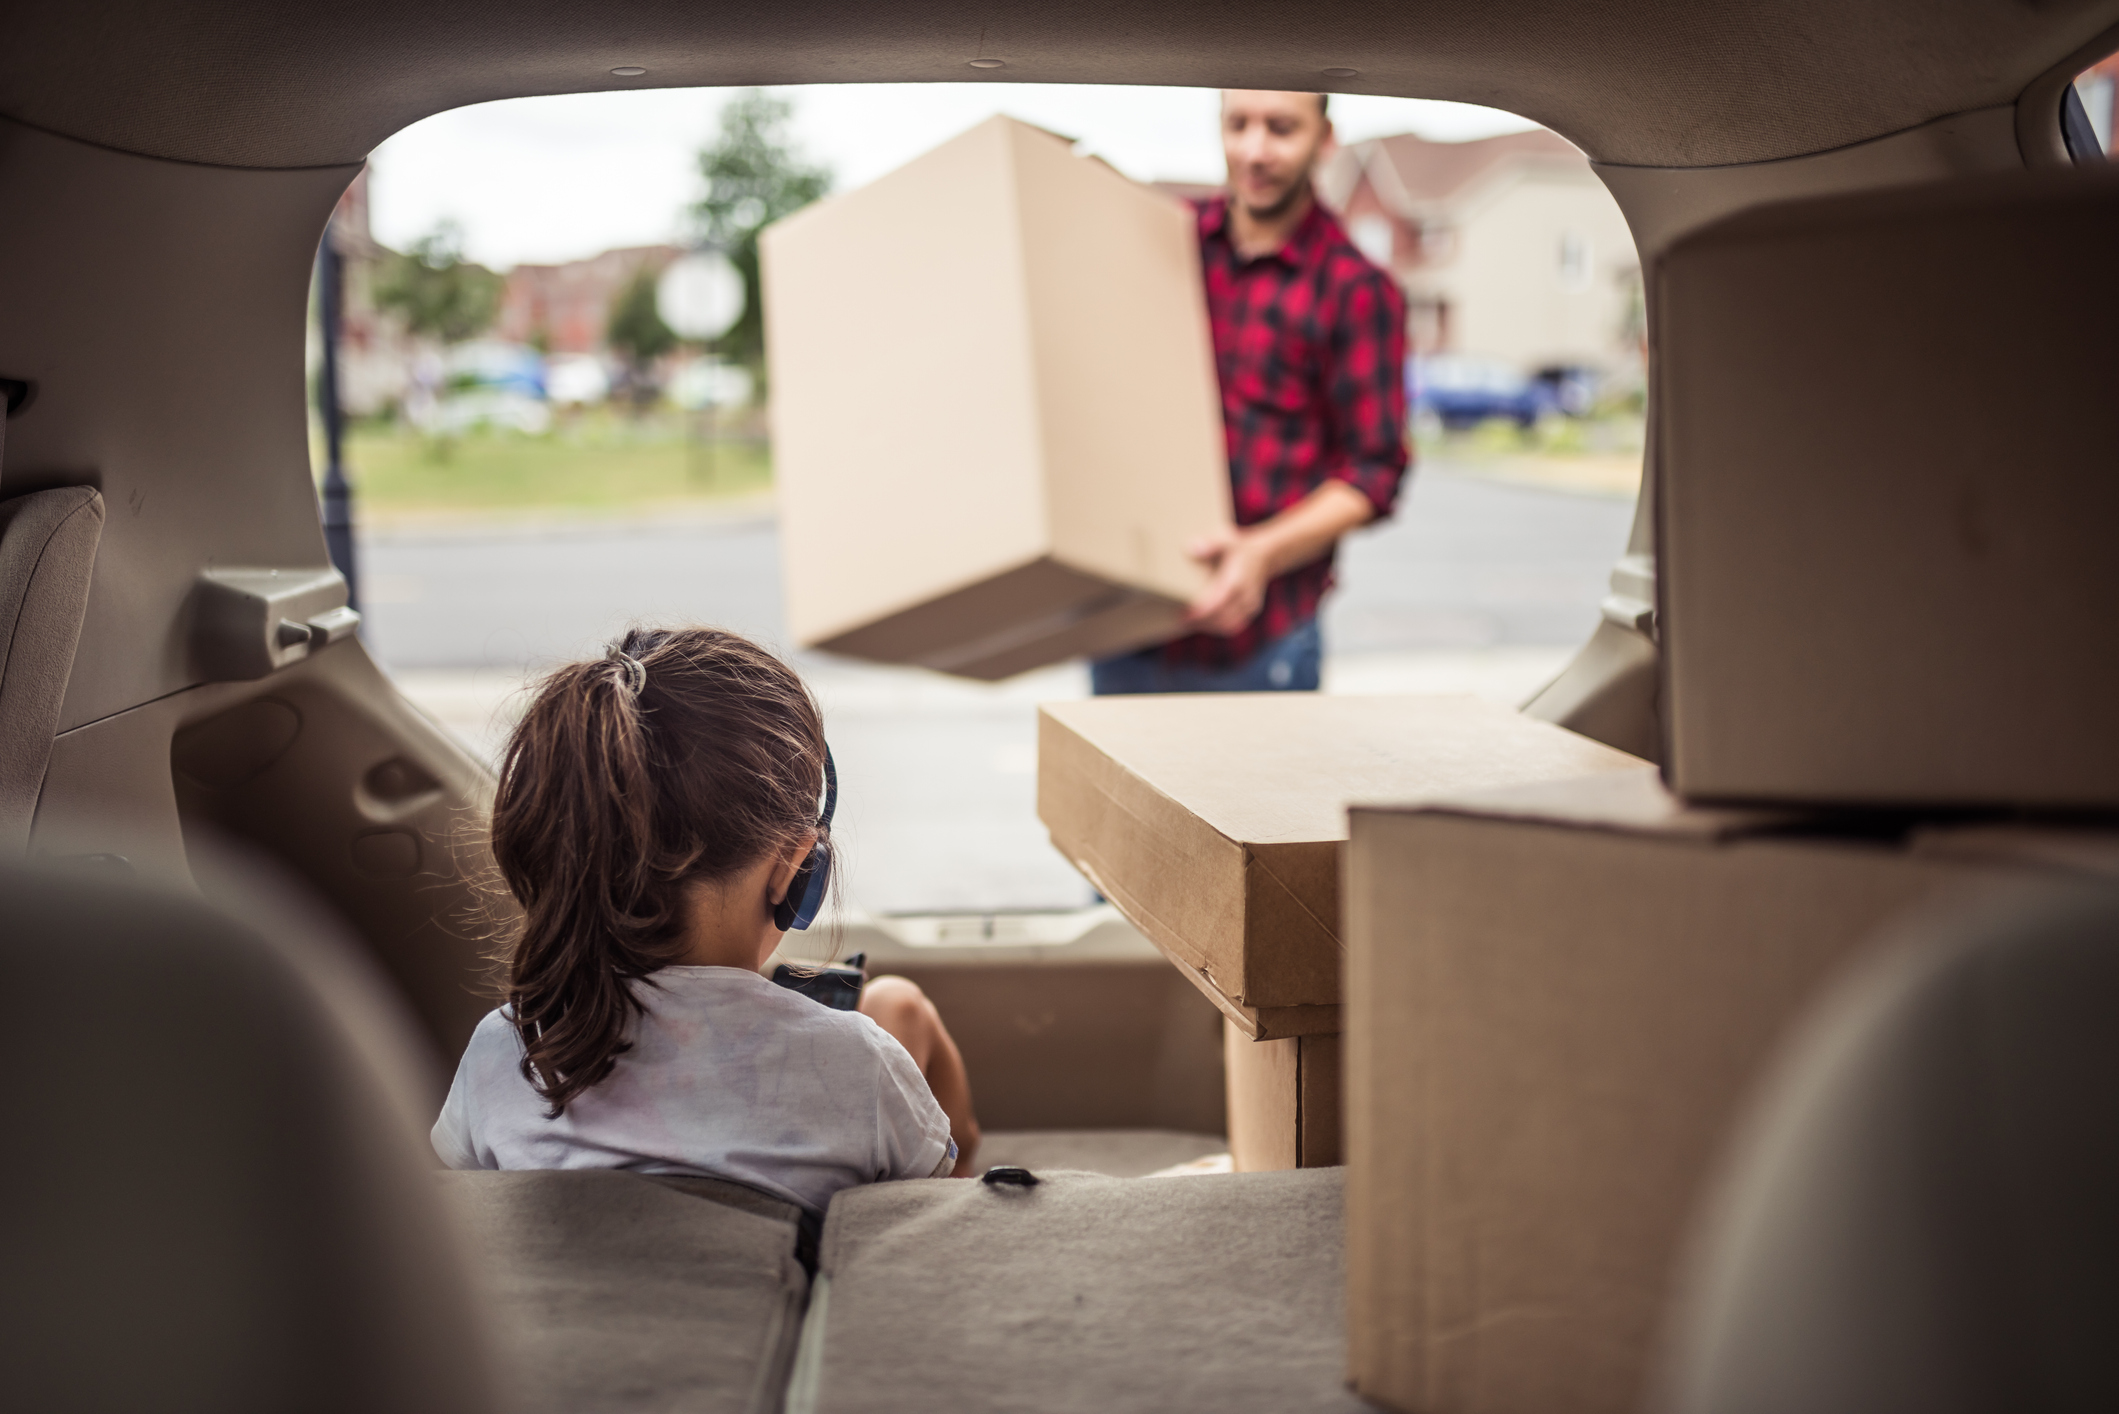 Little girl playing and listening to music in the trunk of the car while her father is loading moving boxes into the car